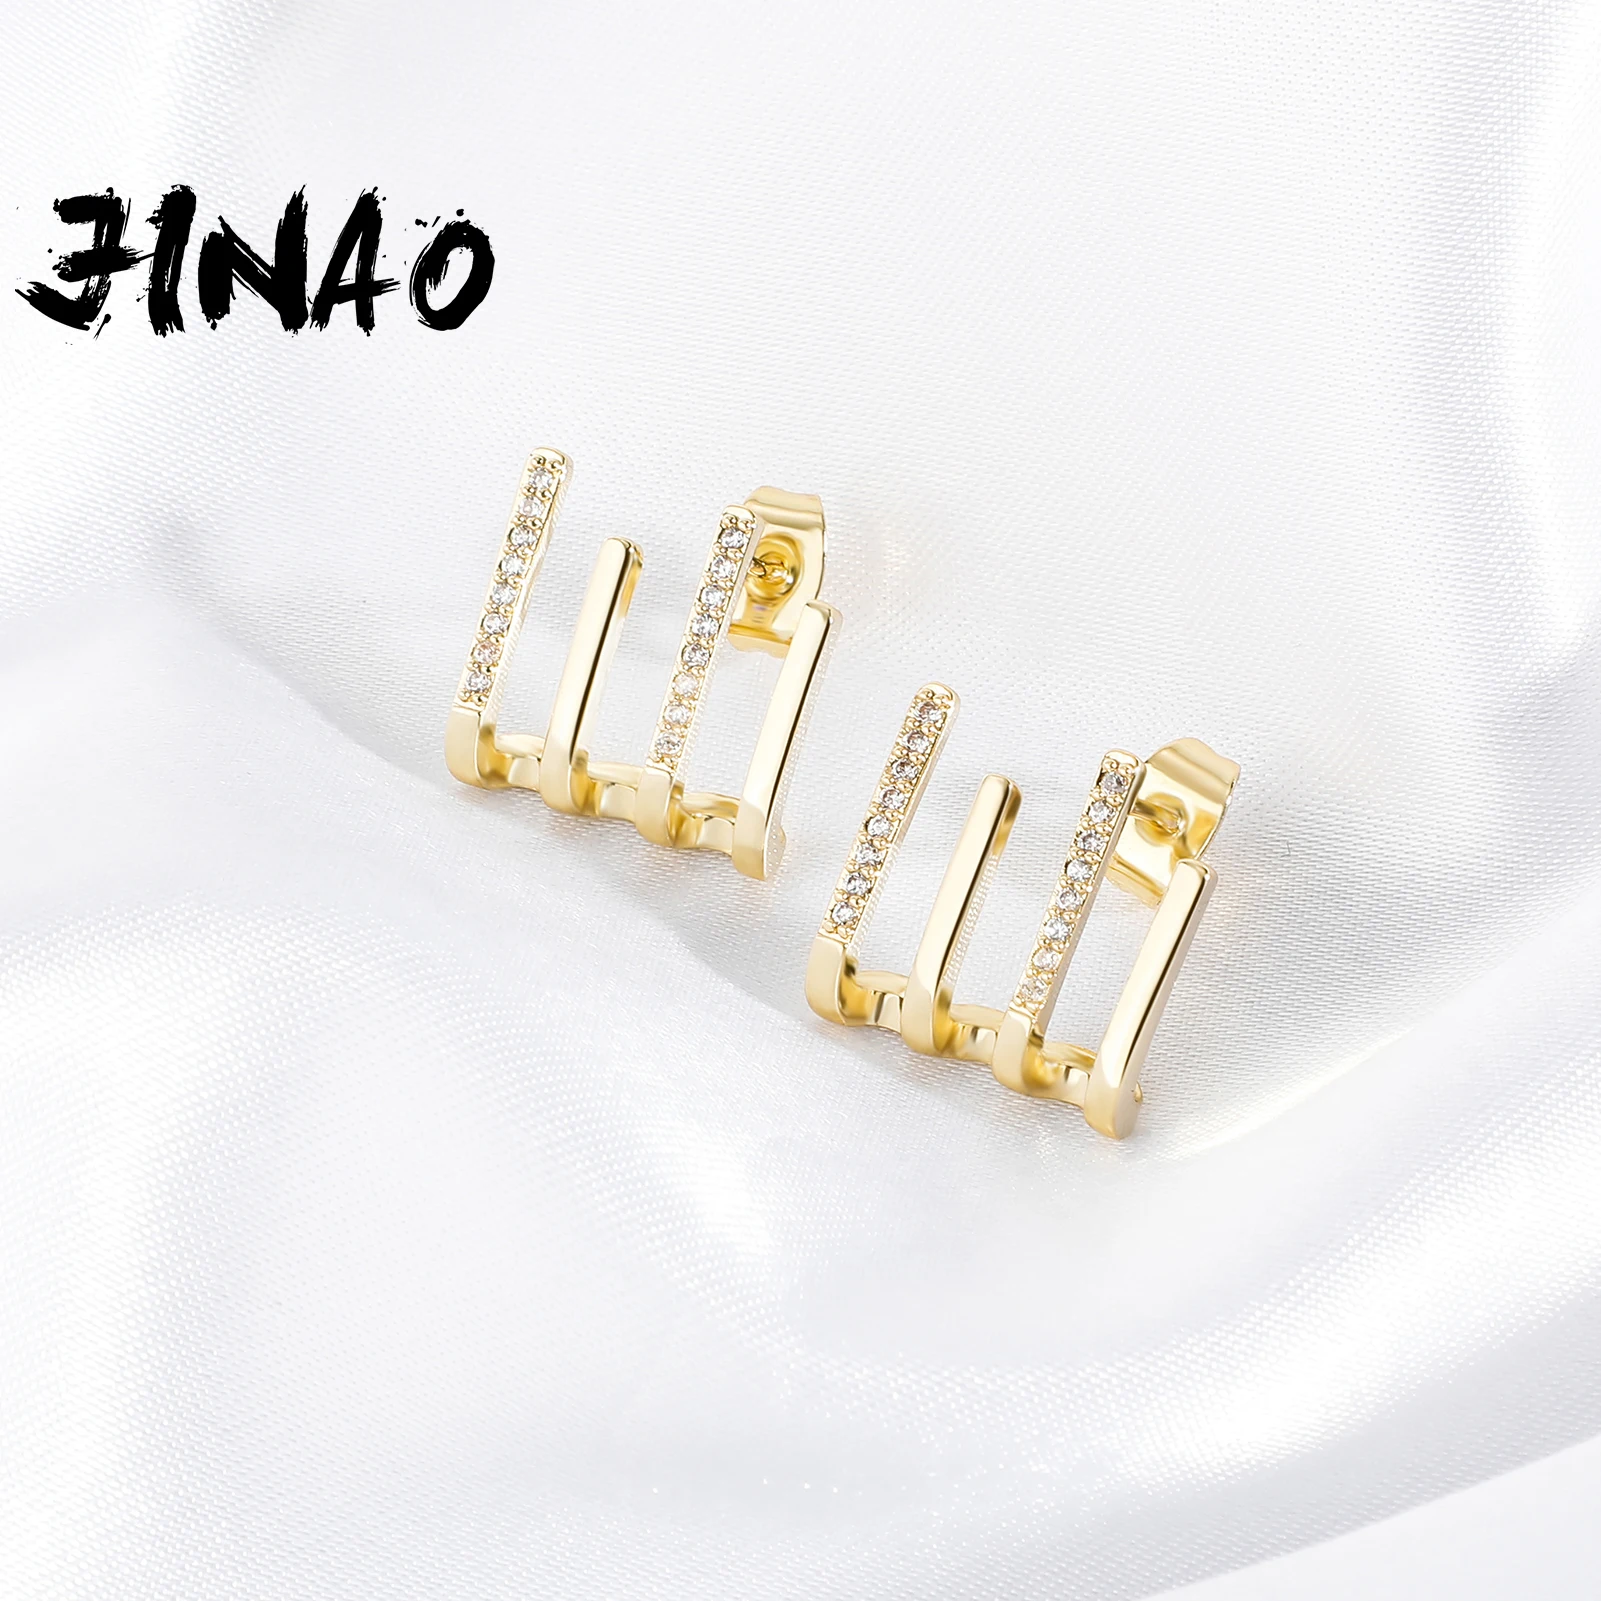 JINAO 2020 NEW European And American style Ice Cravejado AAA+ Cubic Zircon High Quality Rolling Mountain Peak Design Earring